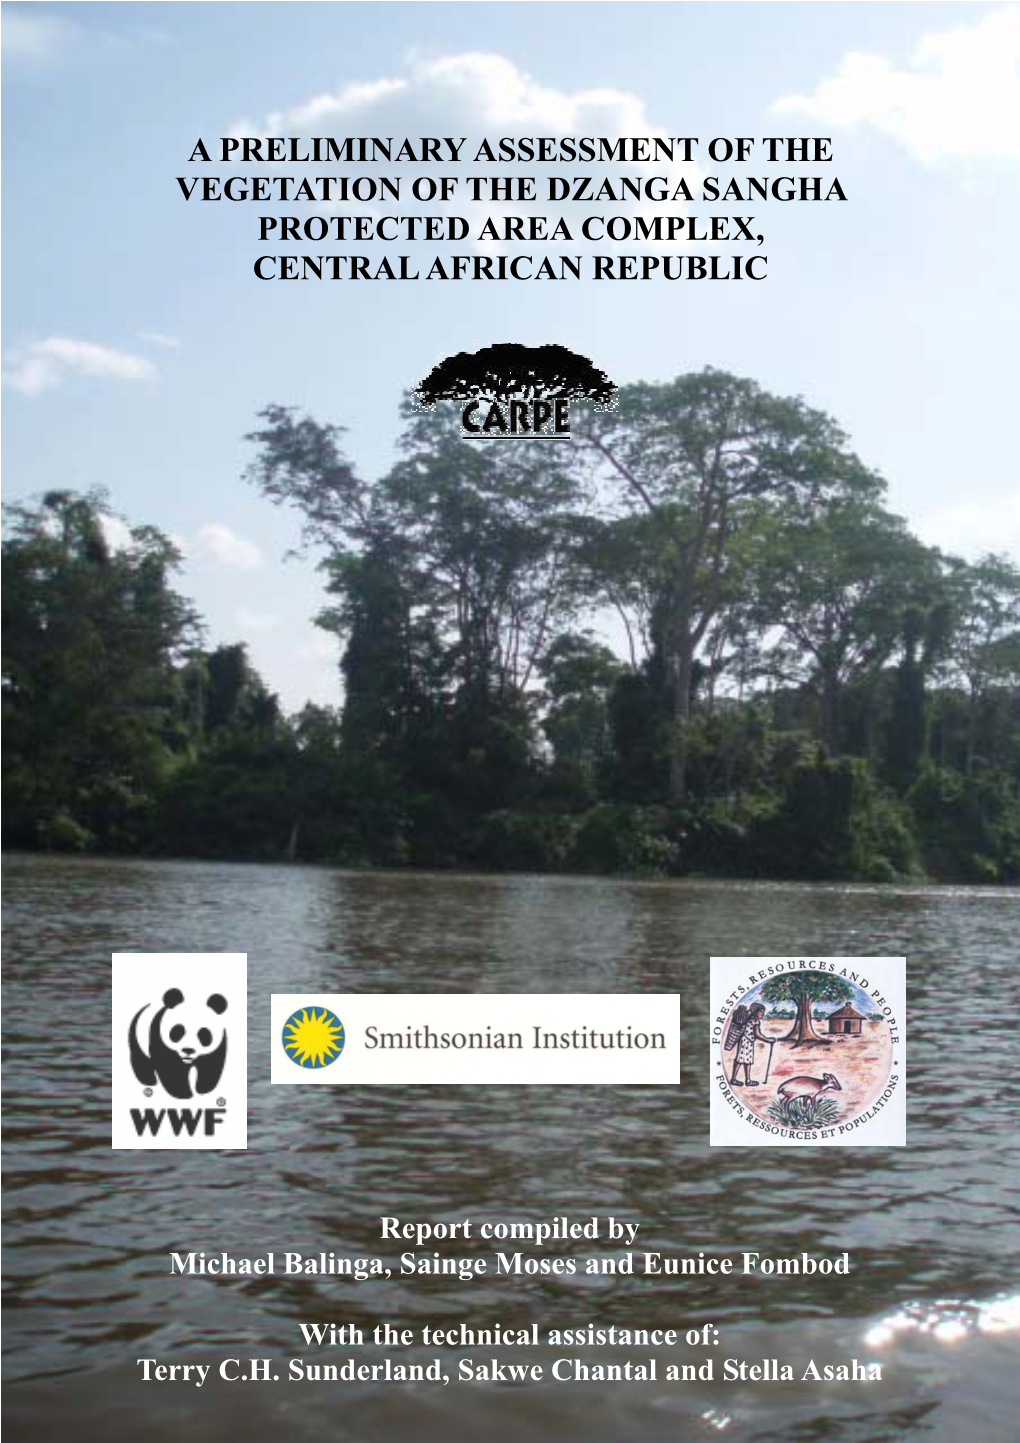 A Preliminary Assessment of the Vegetation of the Dzanga Sangha Protected Area Complex, Central African Republic